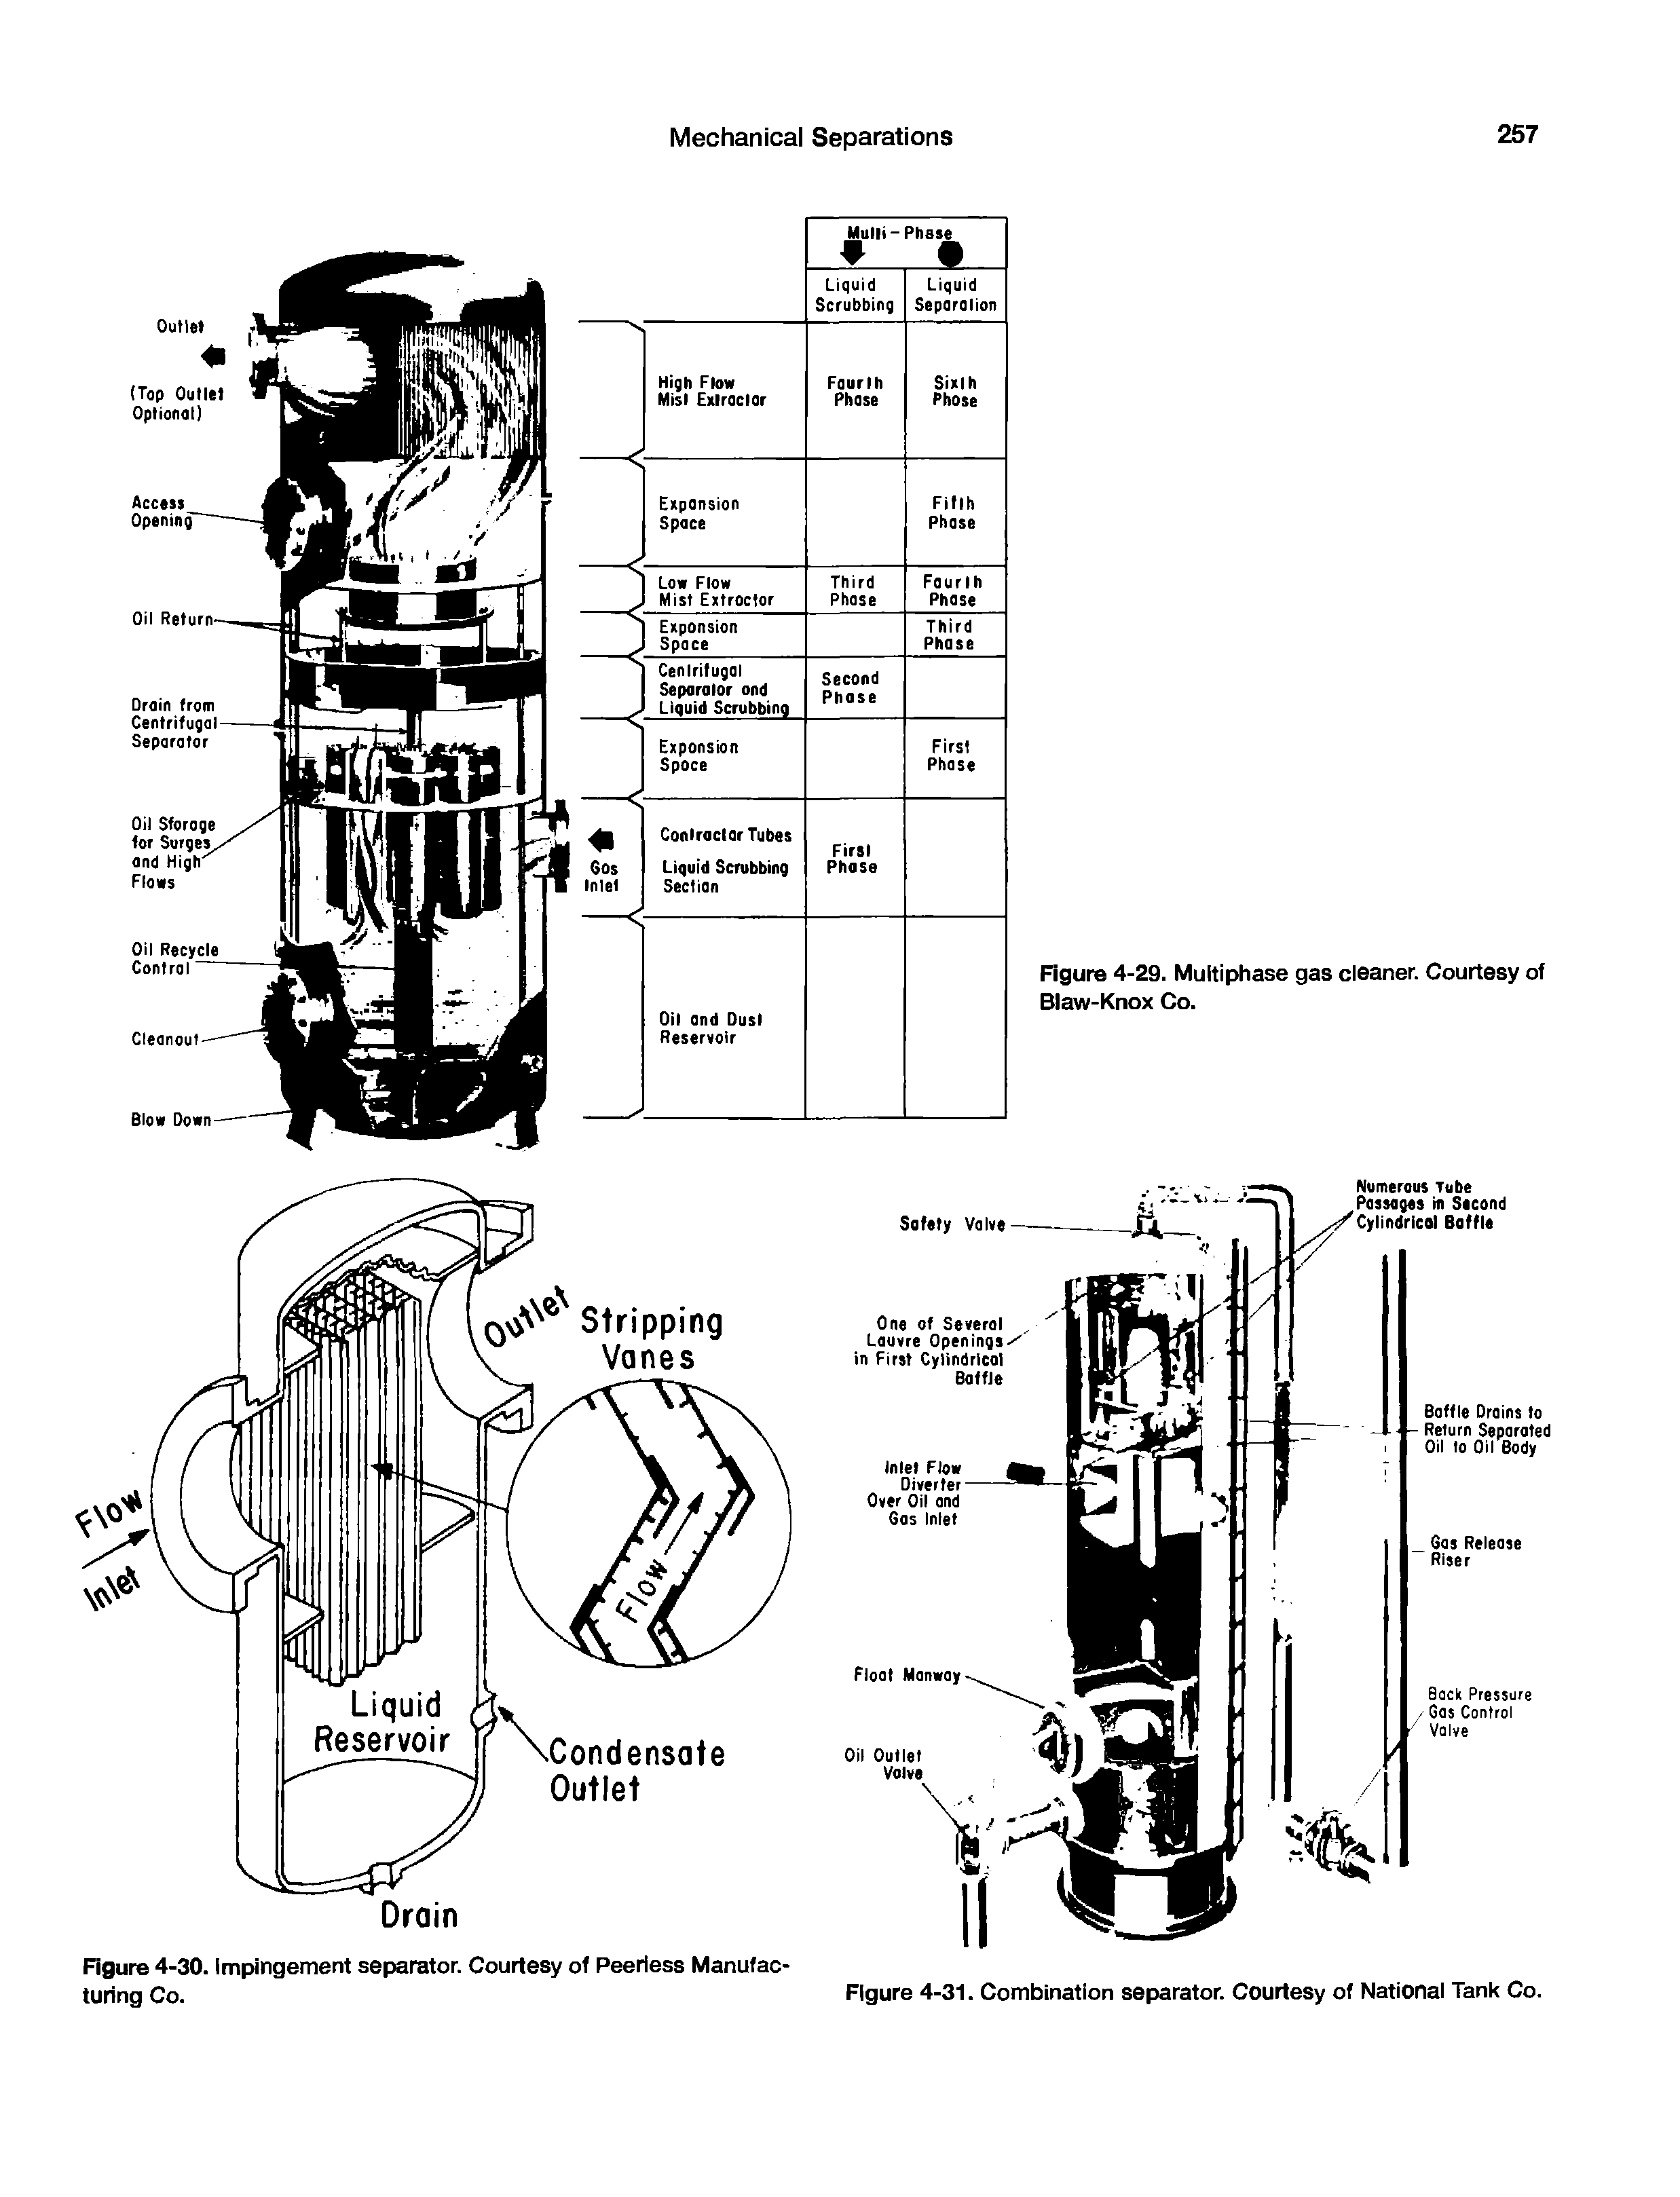 Figure 4-30. Impingement separator. Courtesy of Peerless Manufacturing Co. Figure 4-31. Combination separator. Courtesy of National Tank Co.